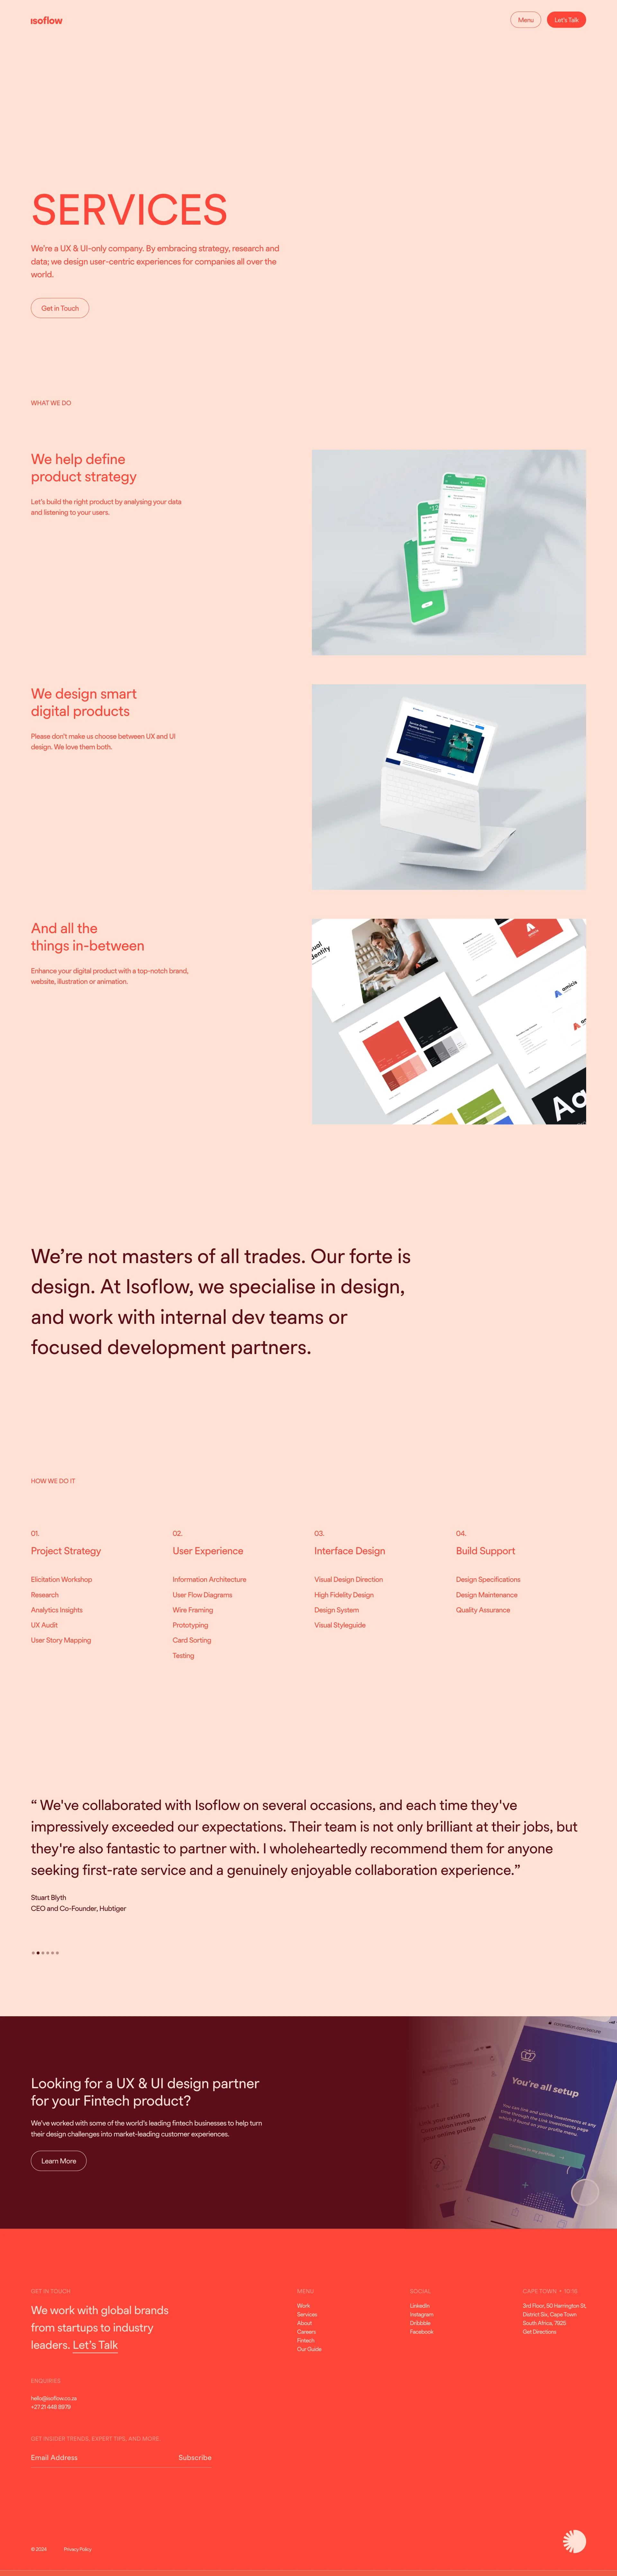 Isoflow Landing Page Example: Isoflow is a specialist UX and UI design company. We're obsessed with simplifying complex digital products.